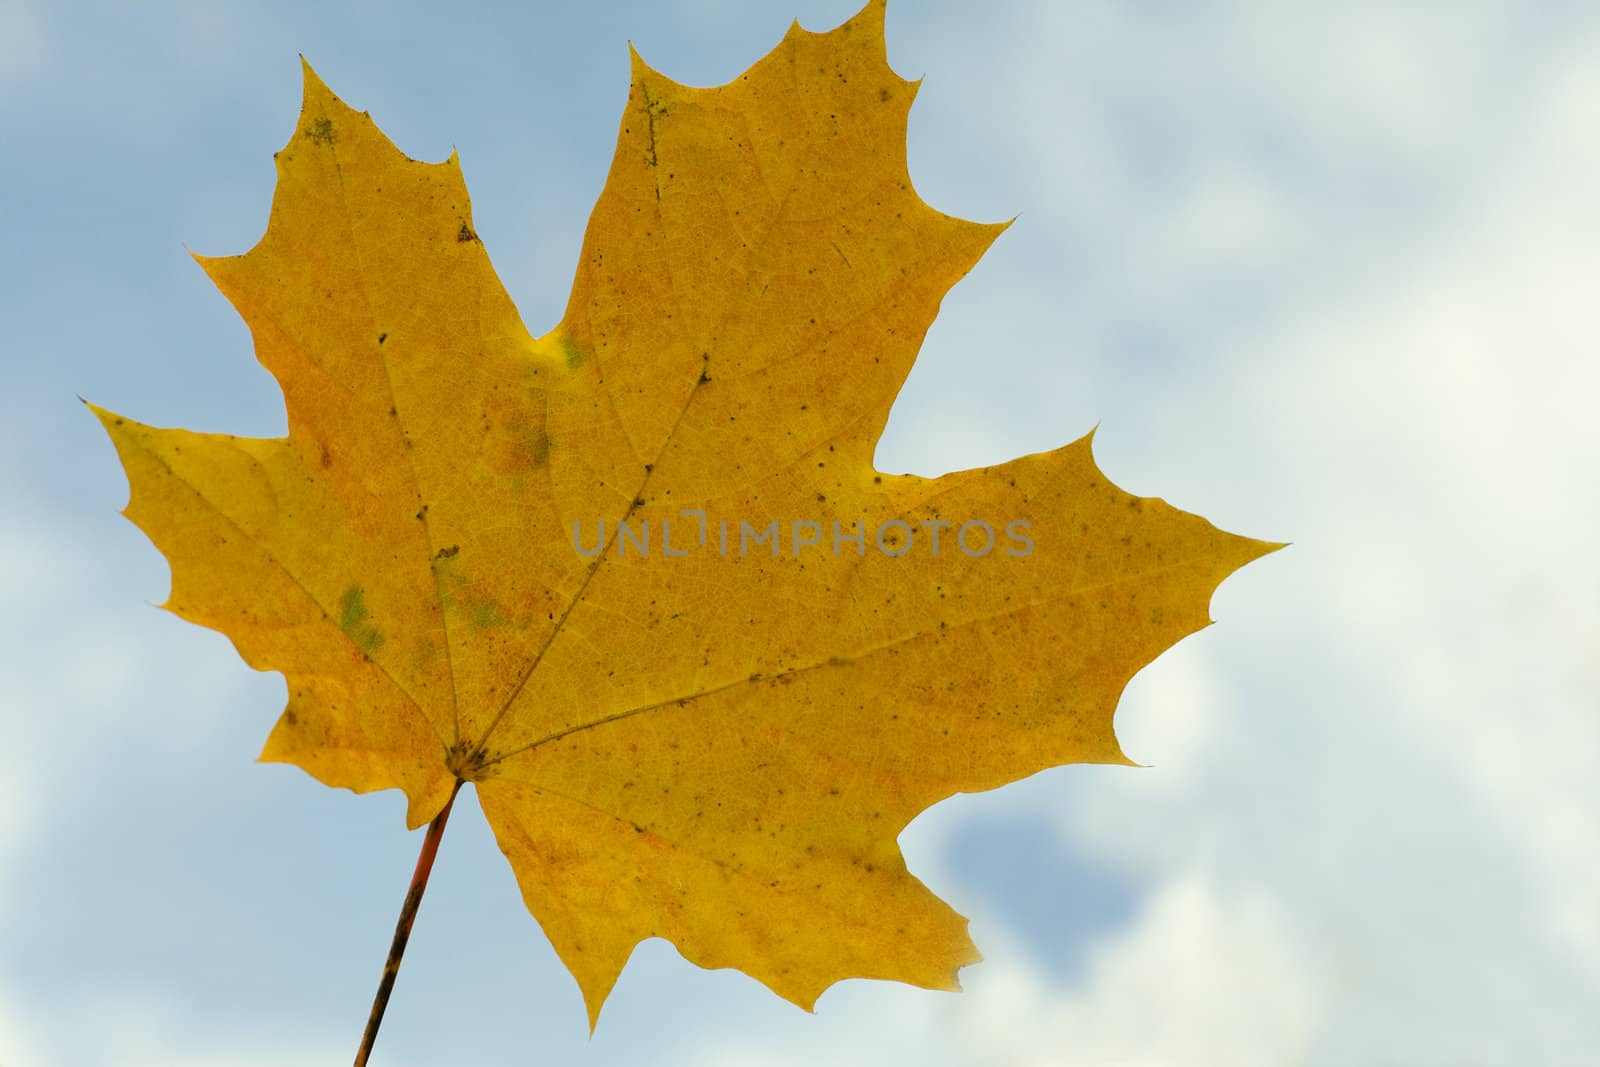 Yellow maple leaf on blue sky background by serpl